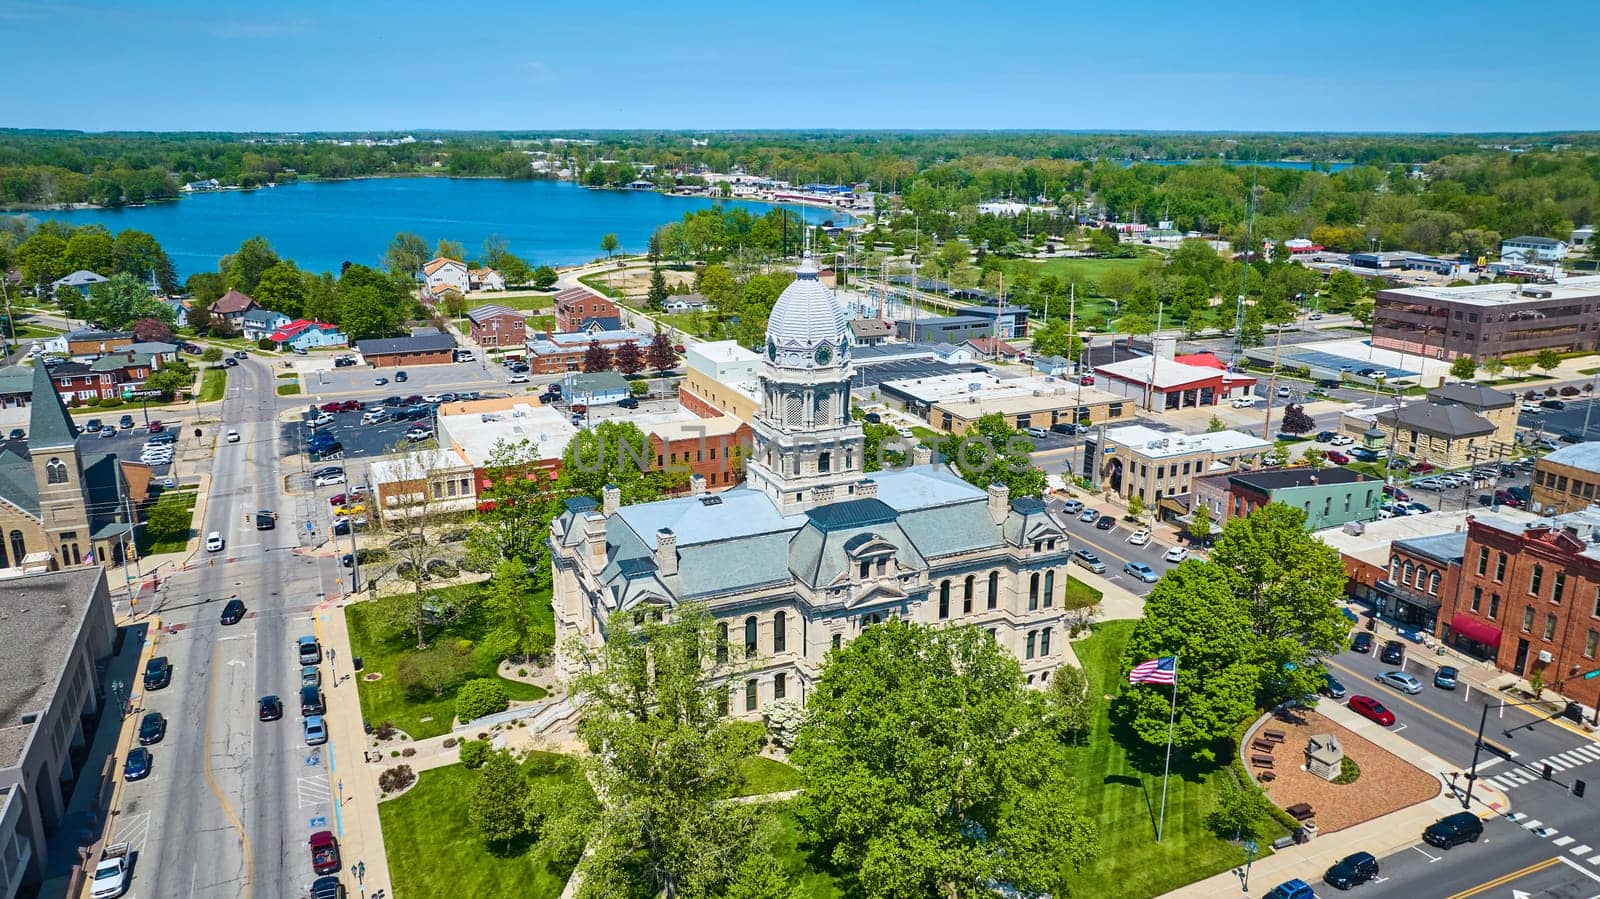 Aerial view of Warsaw, Indiana, featuring the historic Kosciusko County Courthouse surrounded by vibrant town life and scenic lake.